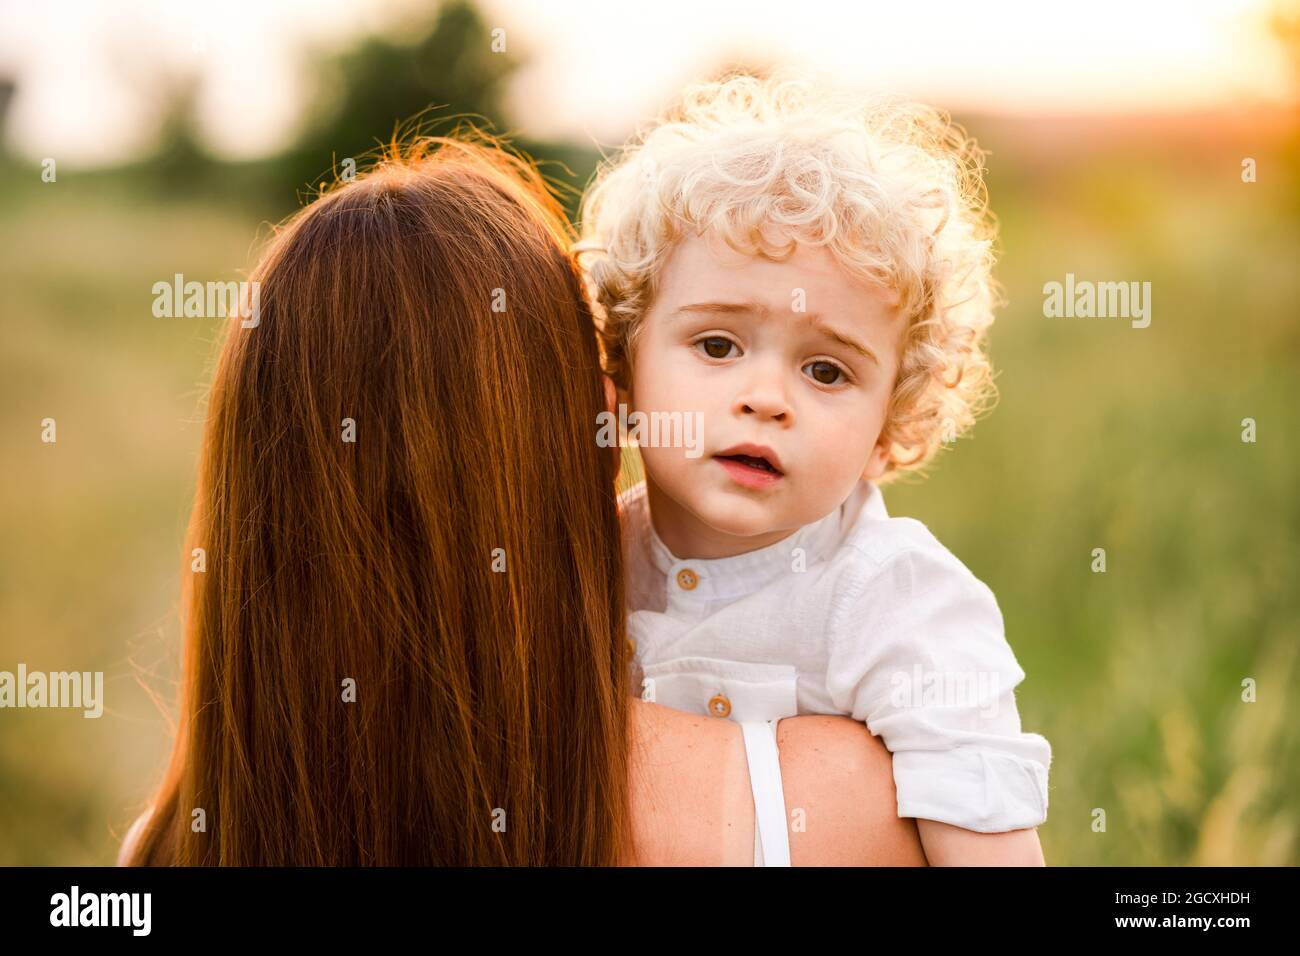 Portrait of a young curly-haired boy in his mother's arms while walking on a field at sunset Stock Photo